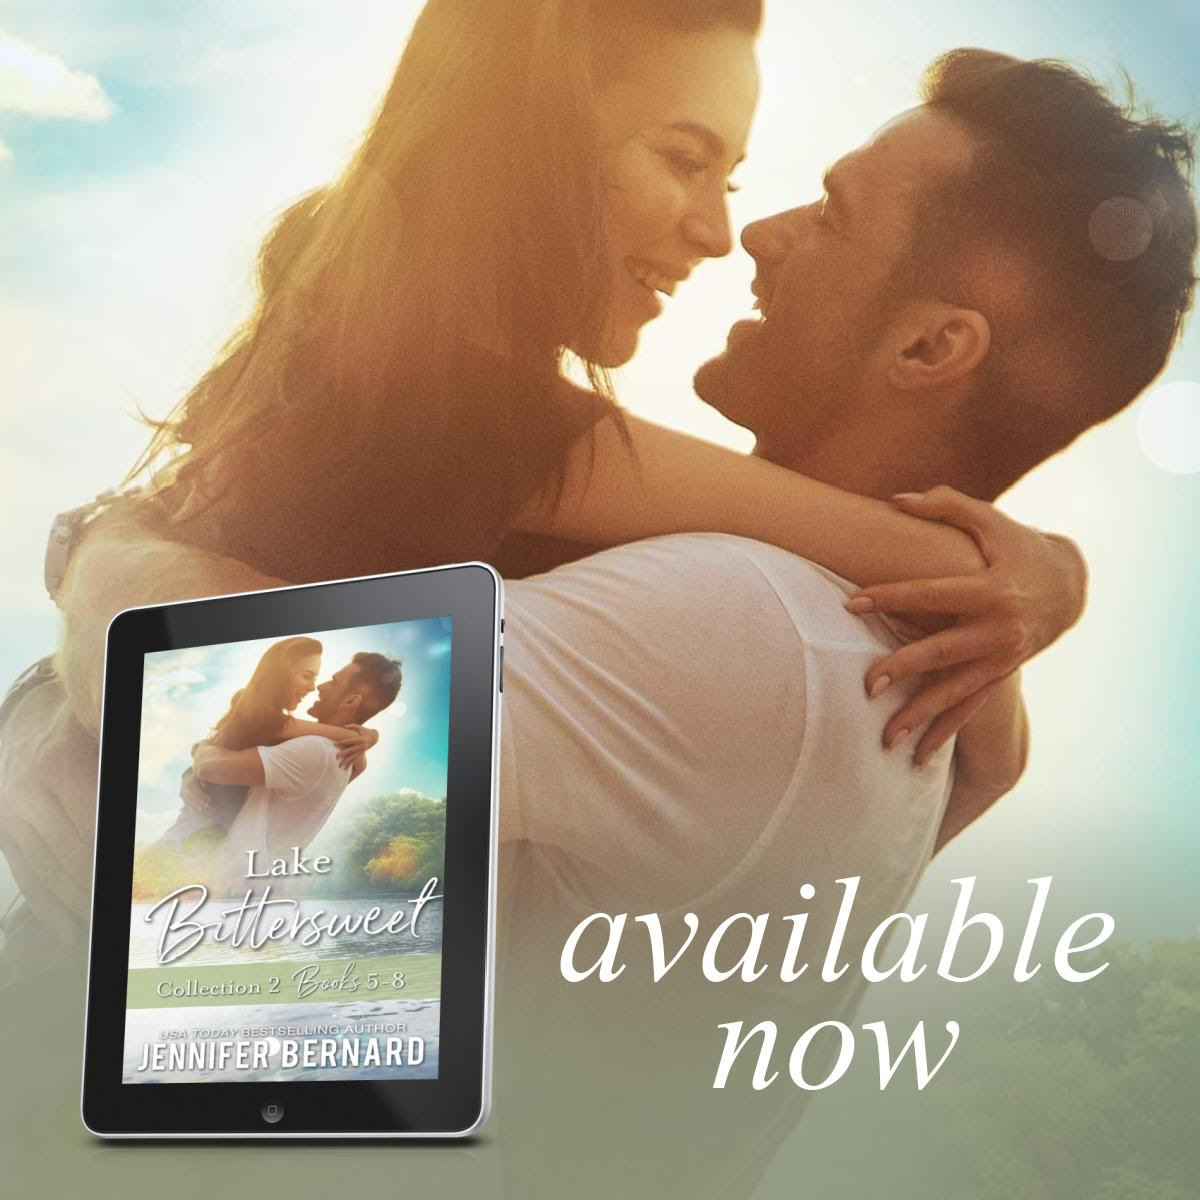 NEW SMALL TOWN ROMANCE COLLECTION! Lake Bittersweet Collection 2: Books 5-8 by Jennifer Bernard is now available! geni.us/LakeBitterswee… Available on All Platforms